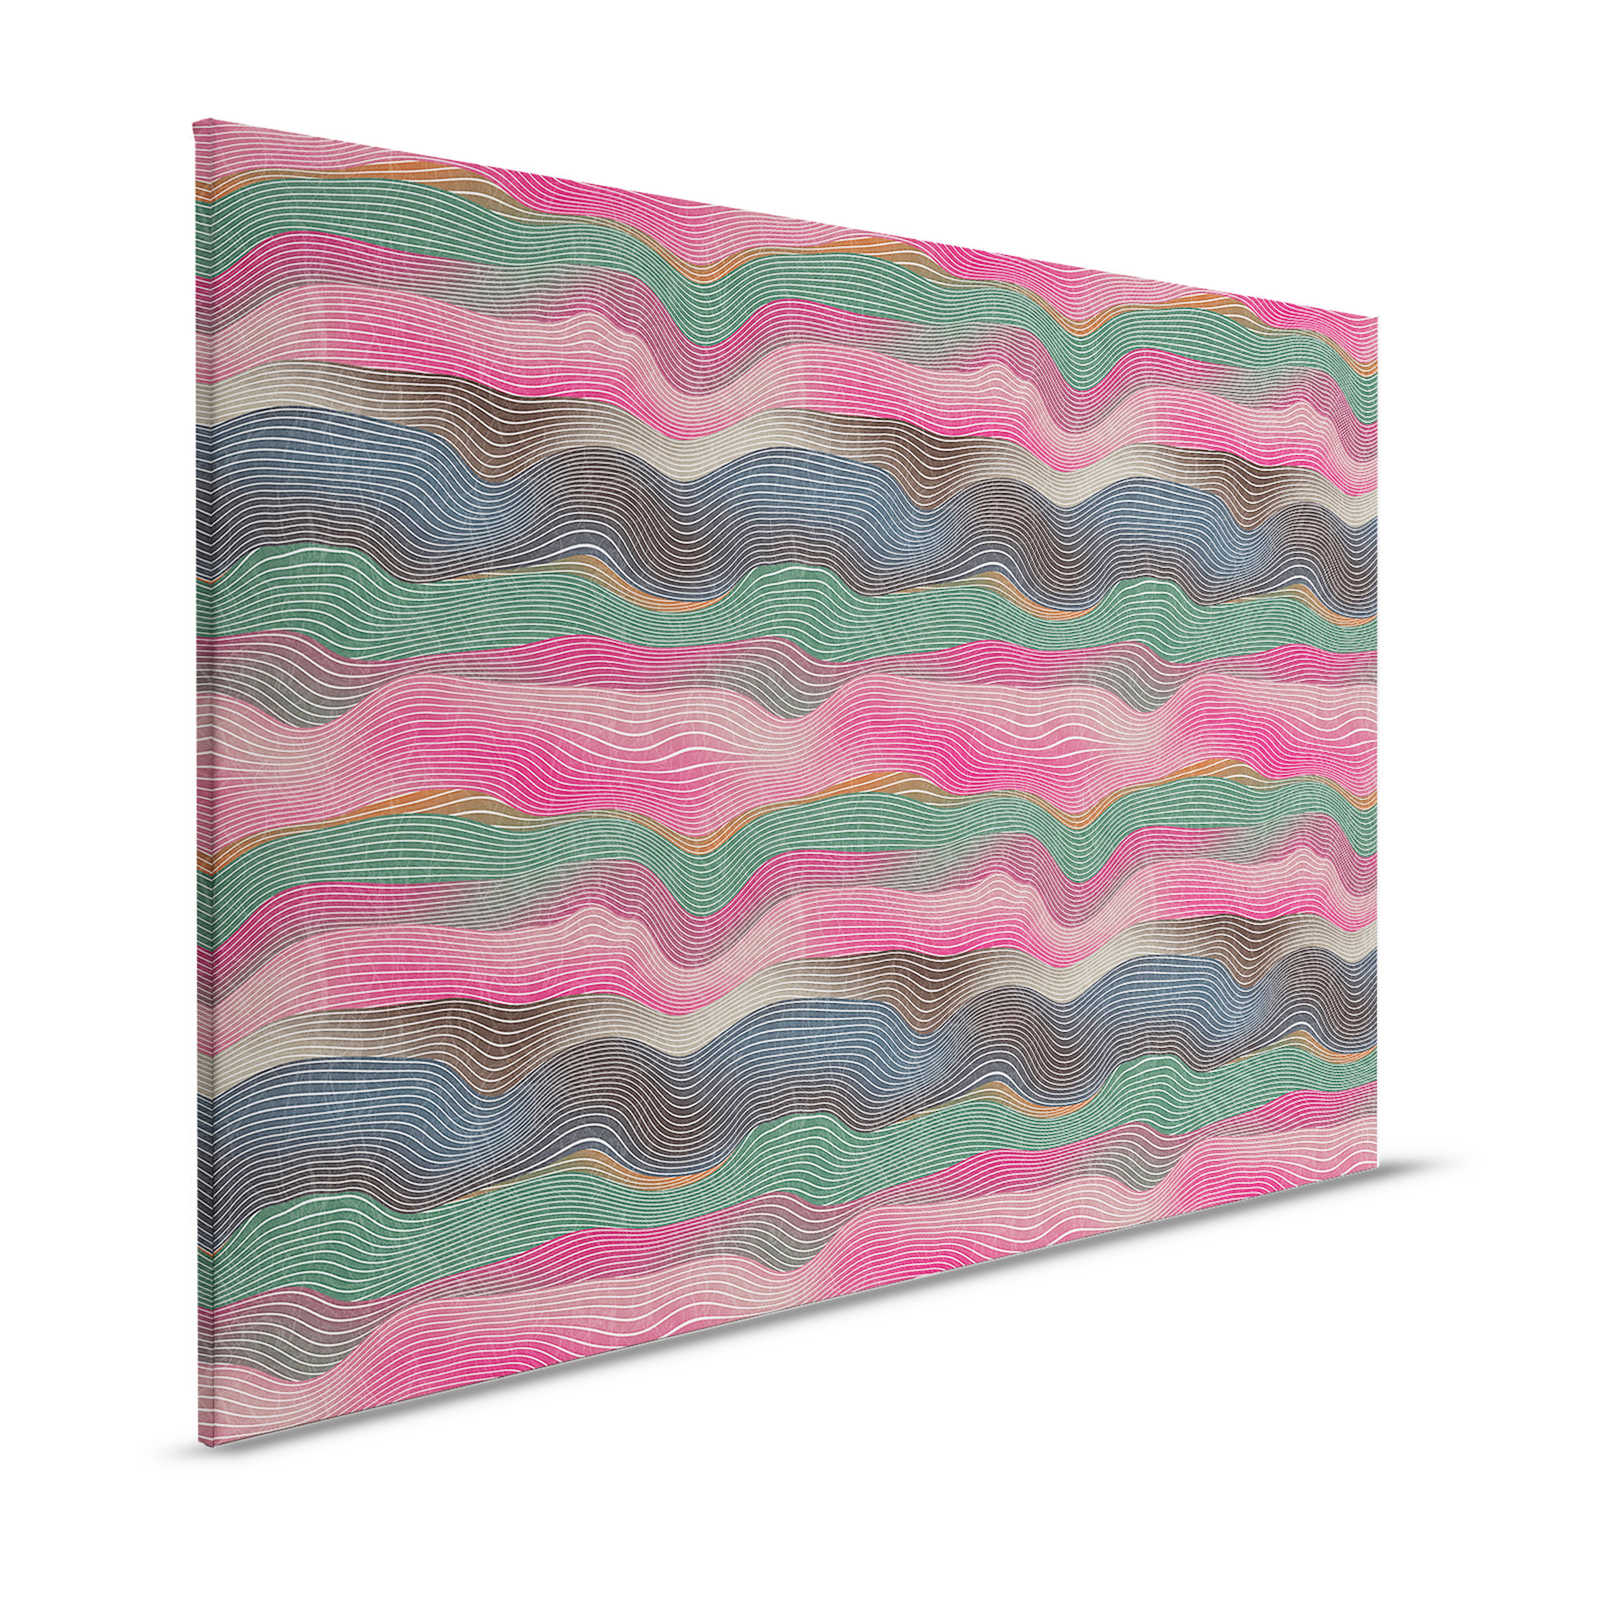 Space 1 - Canvas painting Waves Pattern Pink & Green Retro Style - 1.20 m x 0.80 m
